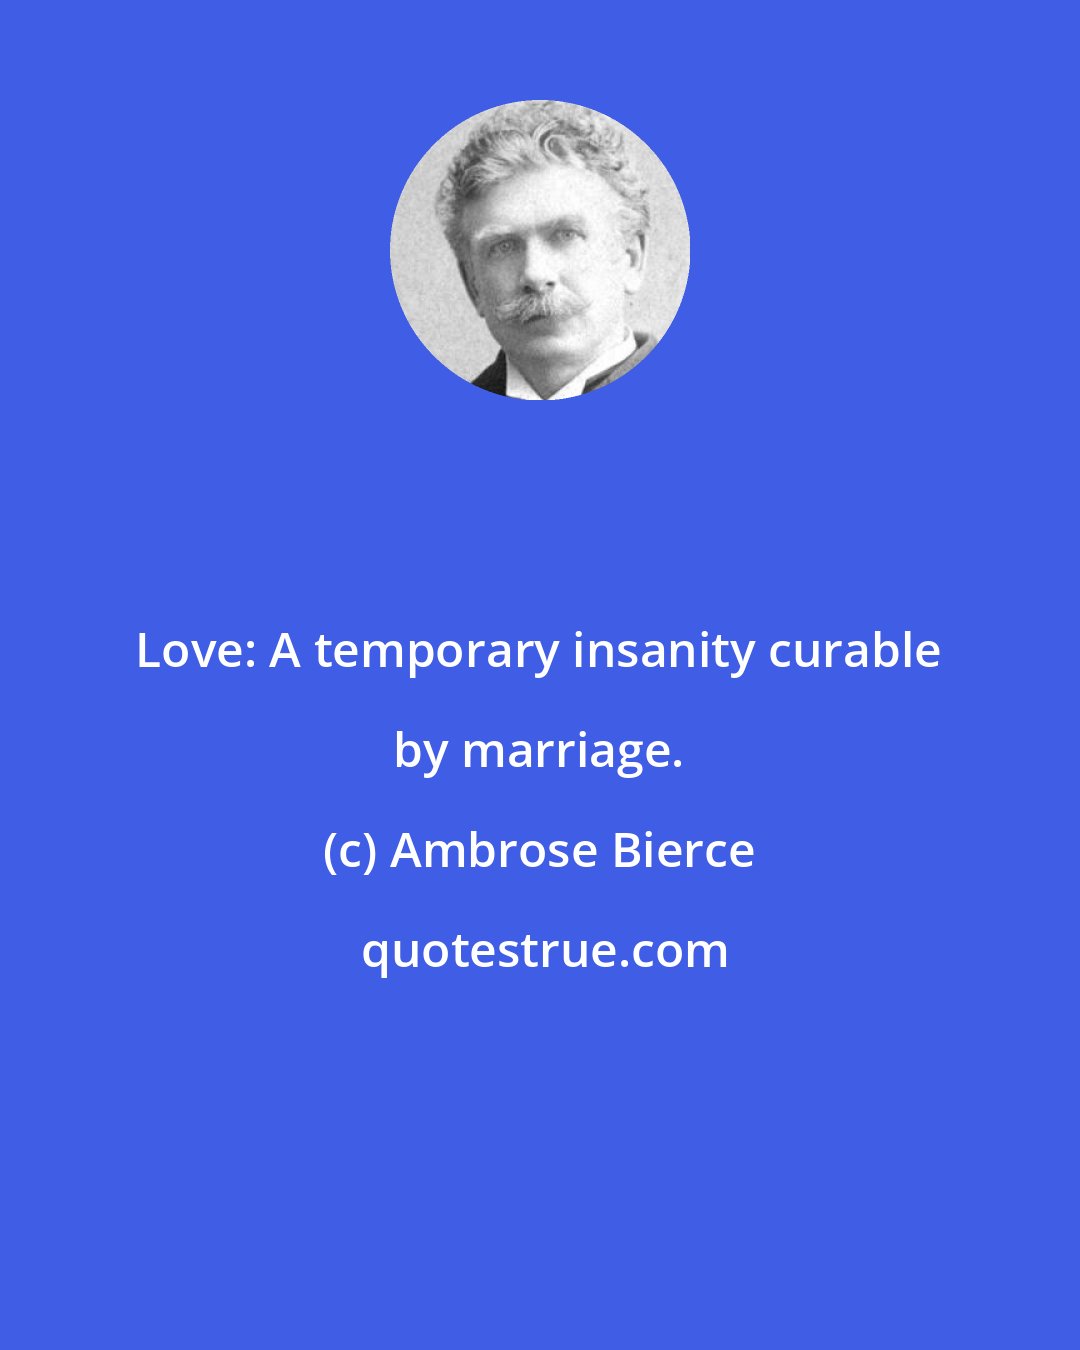 Ambrose Bierce: Love: A temporary insanity curable by marriage.